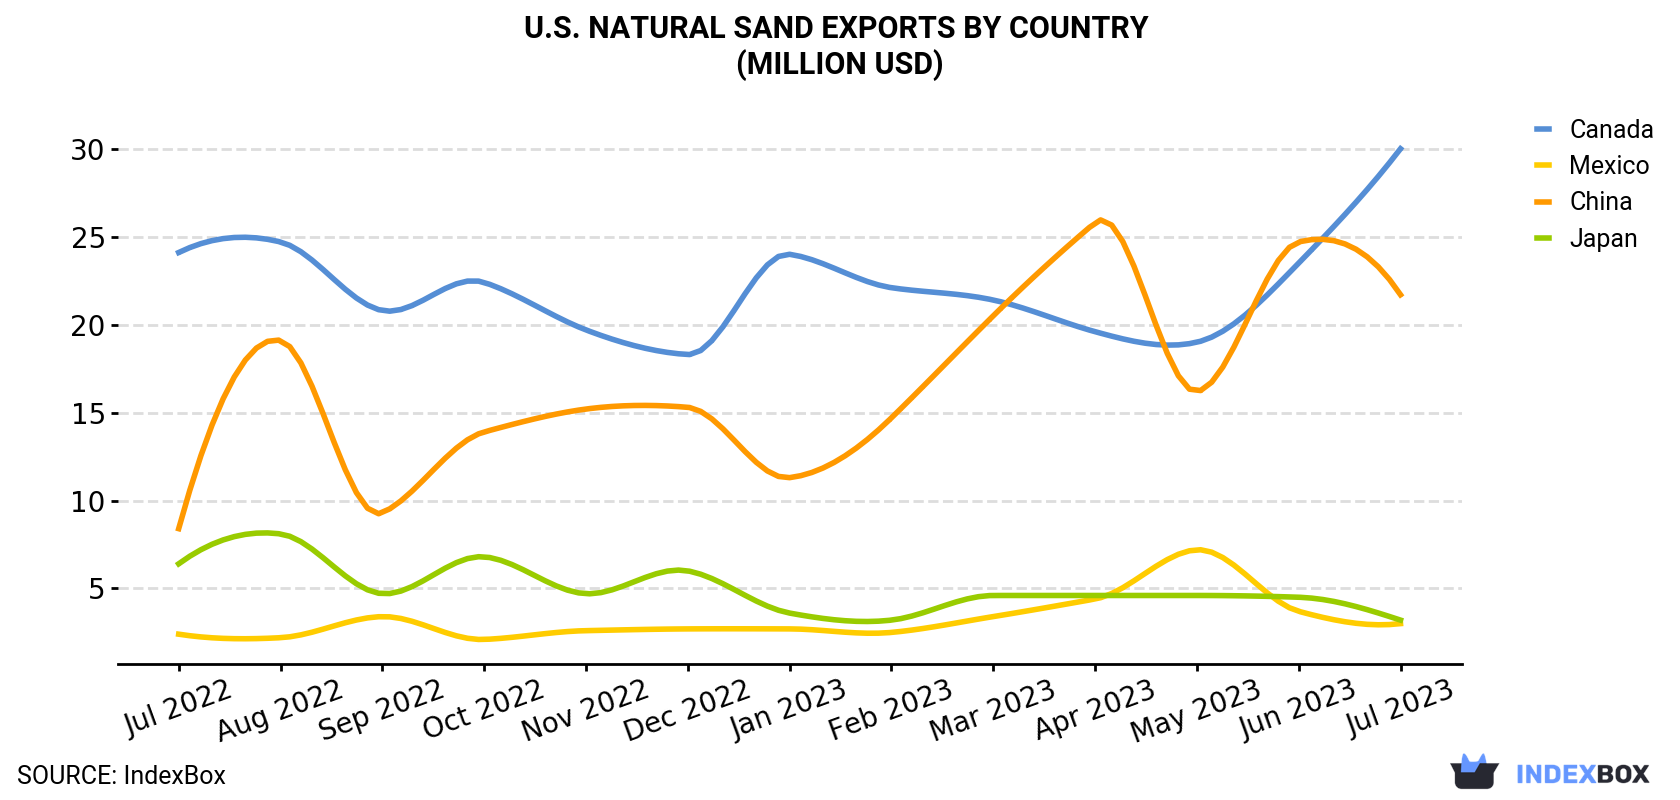 U.S. Natural Sand Exports By Country (Million USD)